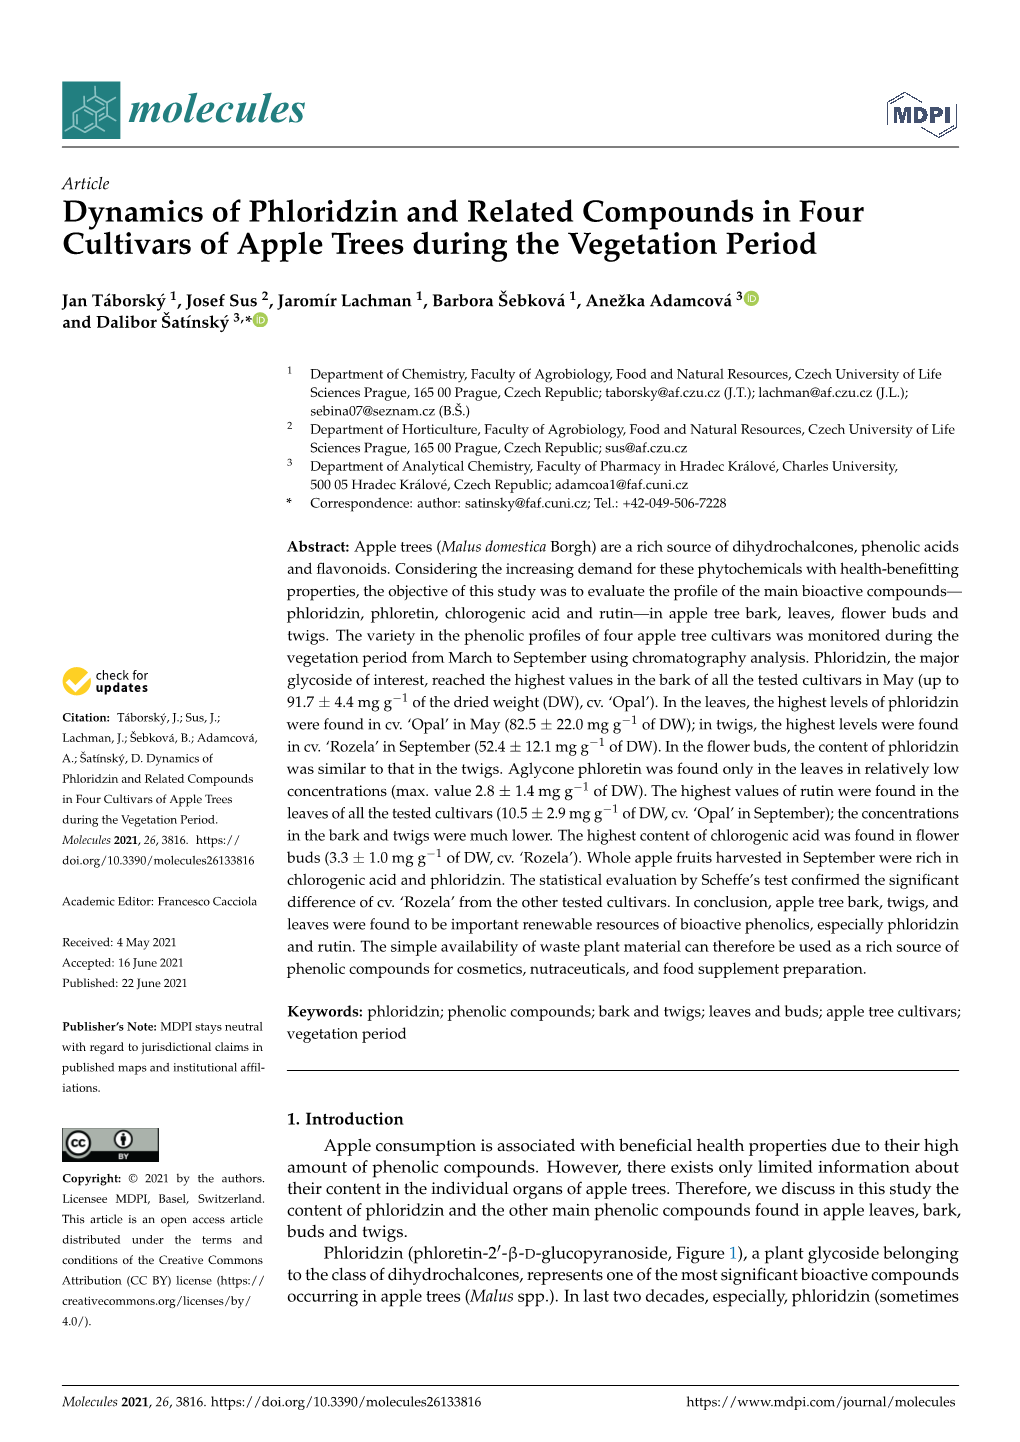 Dynamics of Phloridzin and Related Compounds in Four Cultivars of Apple Trees During the Vegetation Period